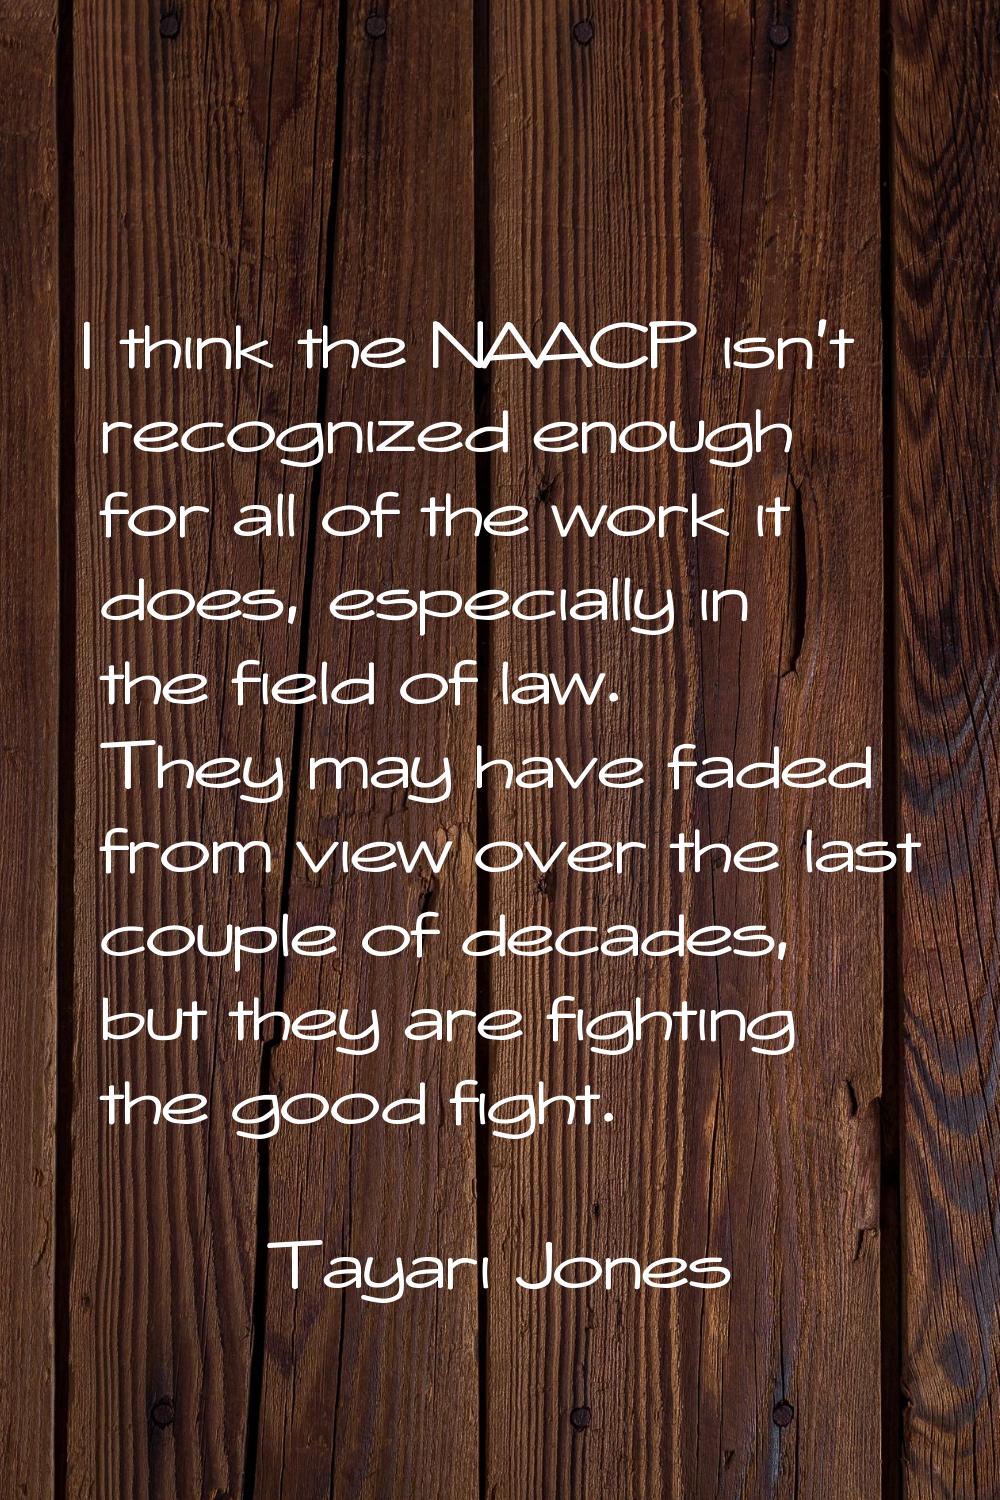 I think the NAACP isn't recognized enough for all of the work it does, especially in the field of l